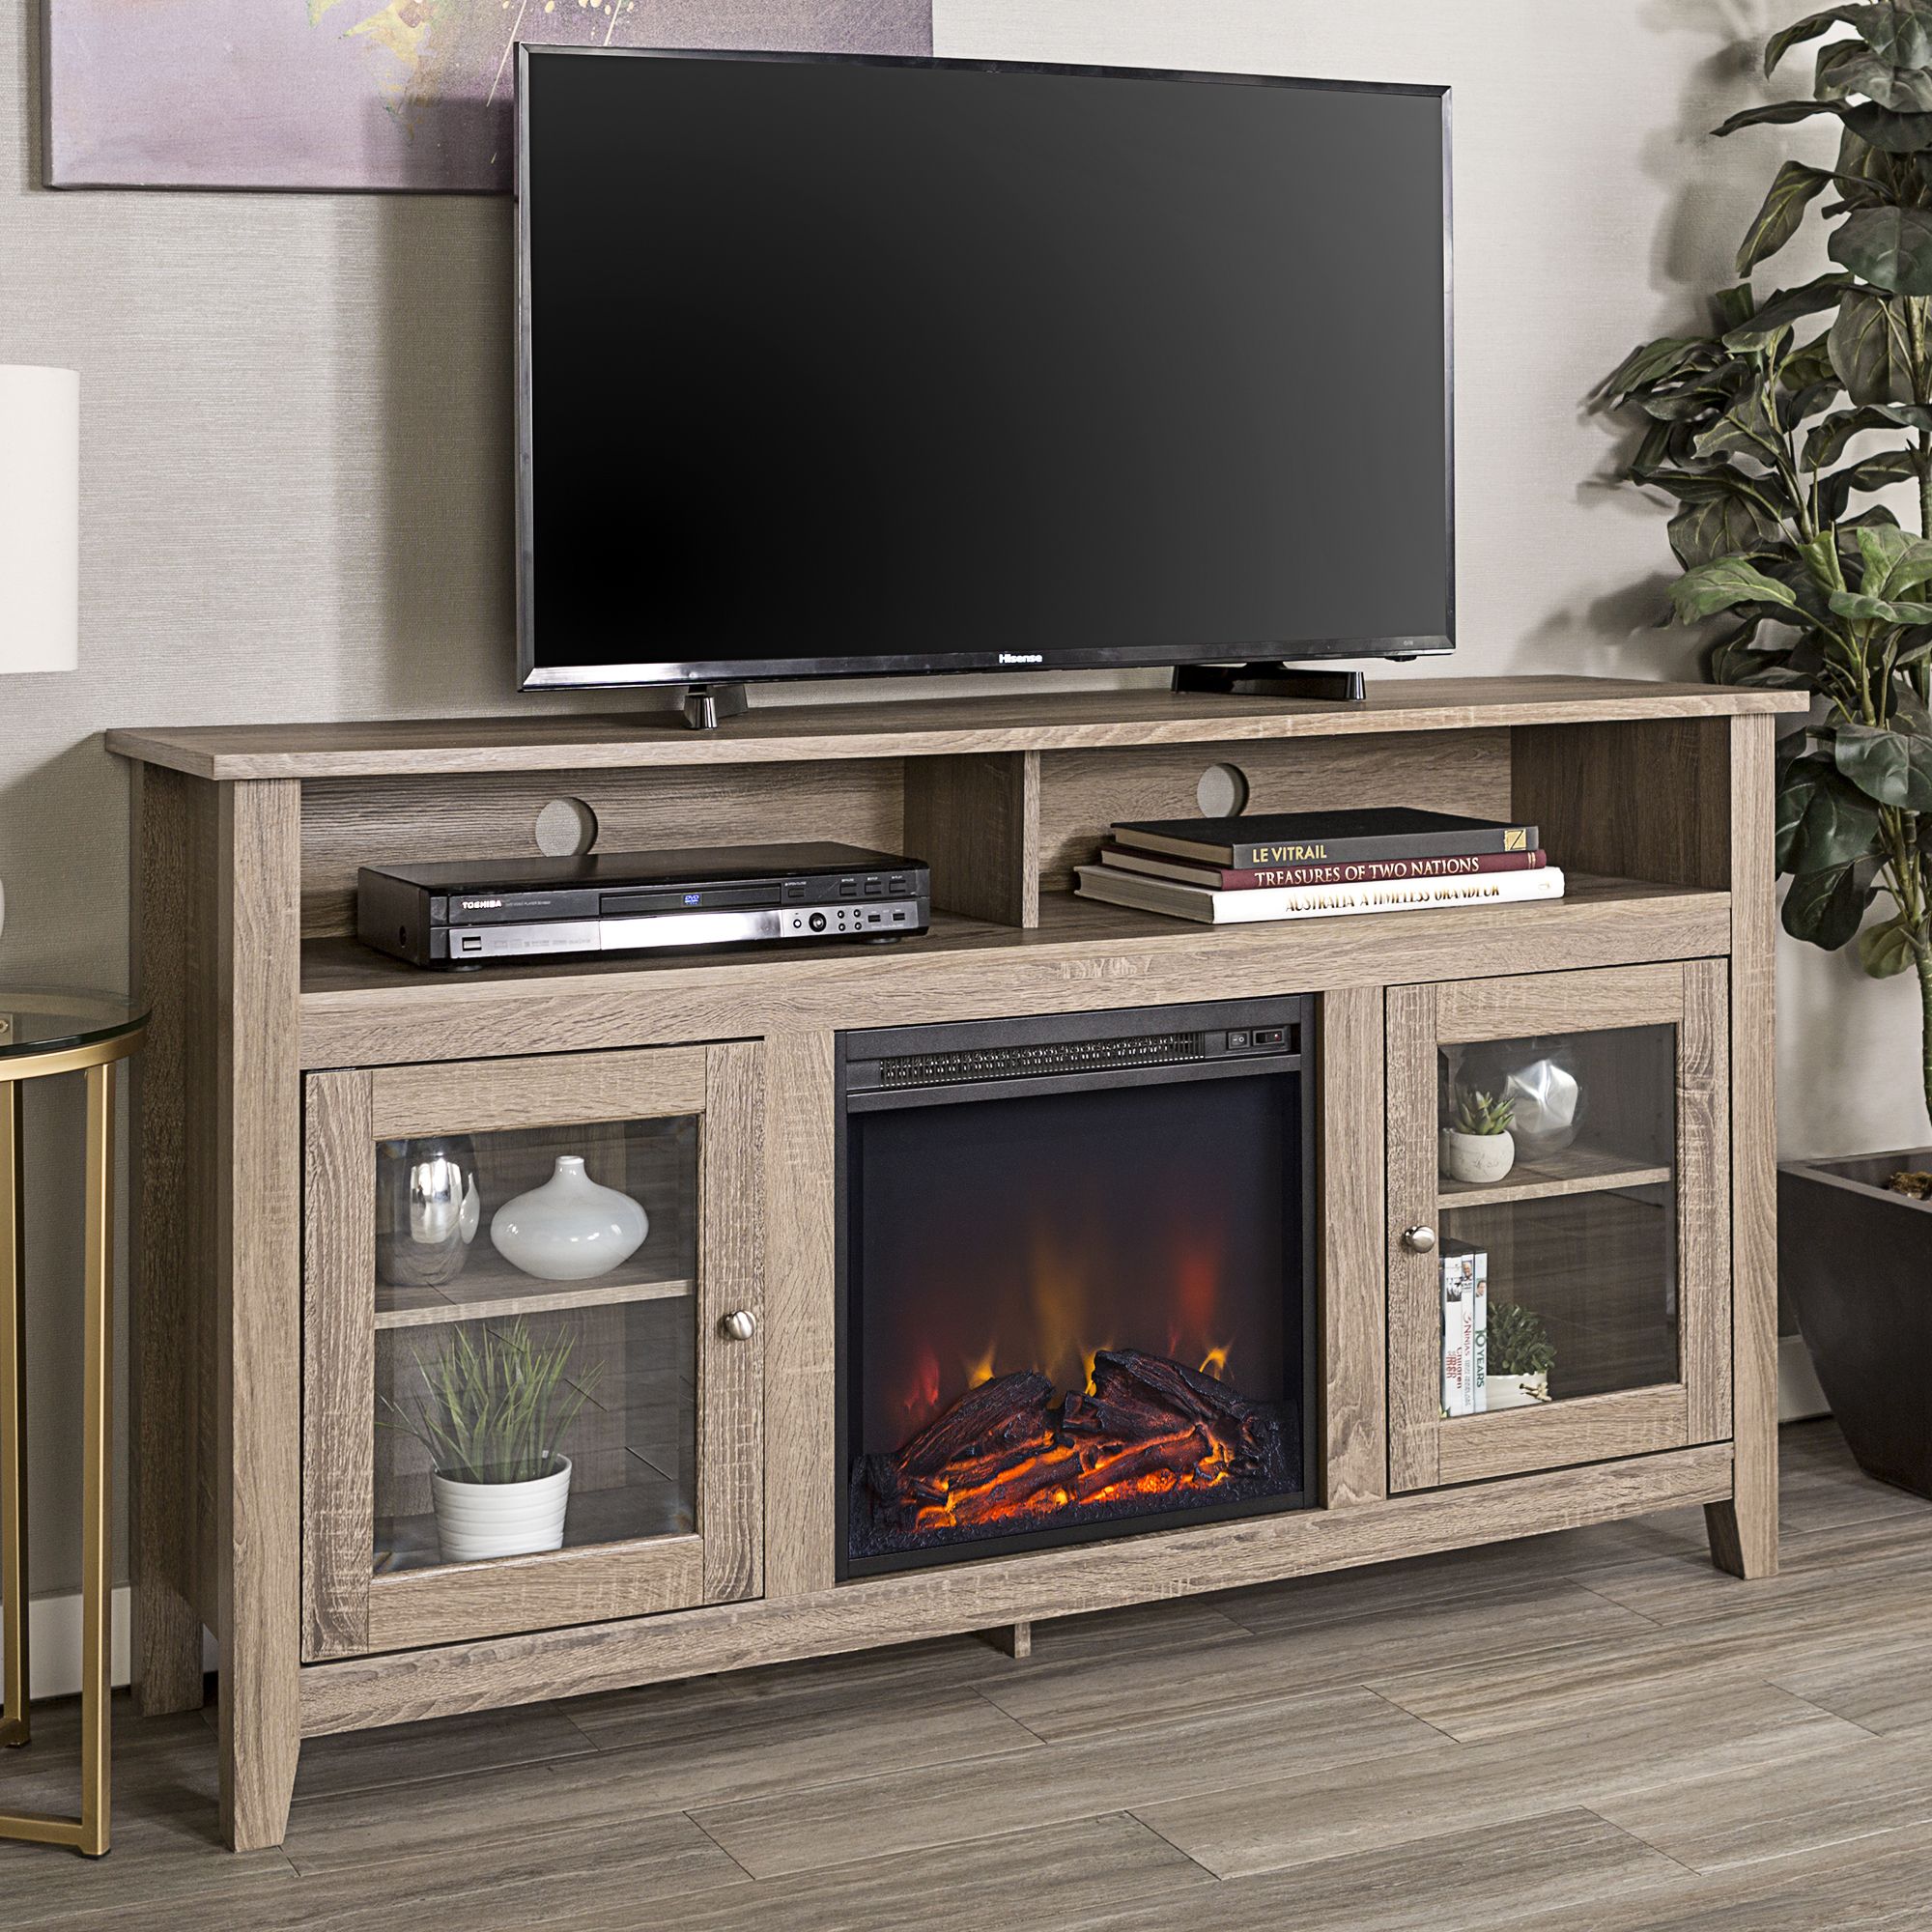 W. Trends 58&quot; Transitional Glass Door Fireplace Tall TV Stand for Most TV's up to 65&quot; - Driftwood